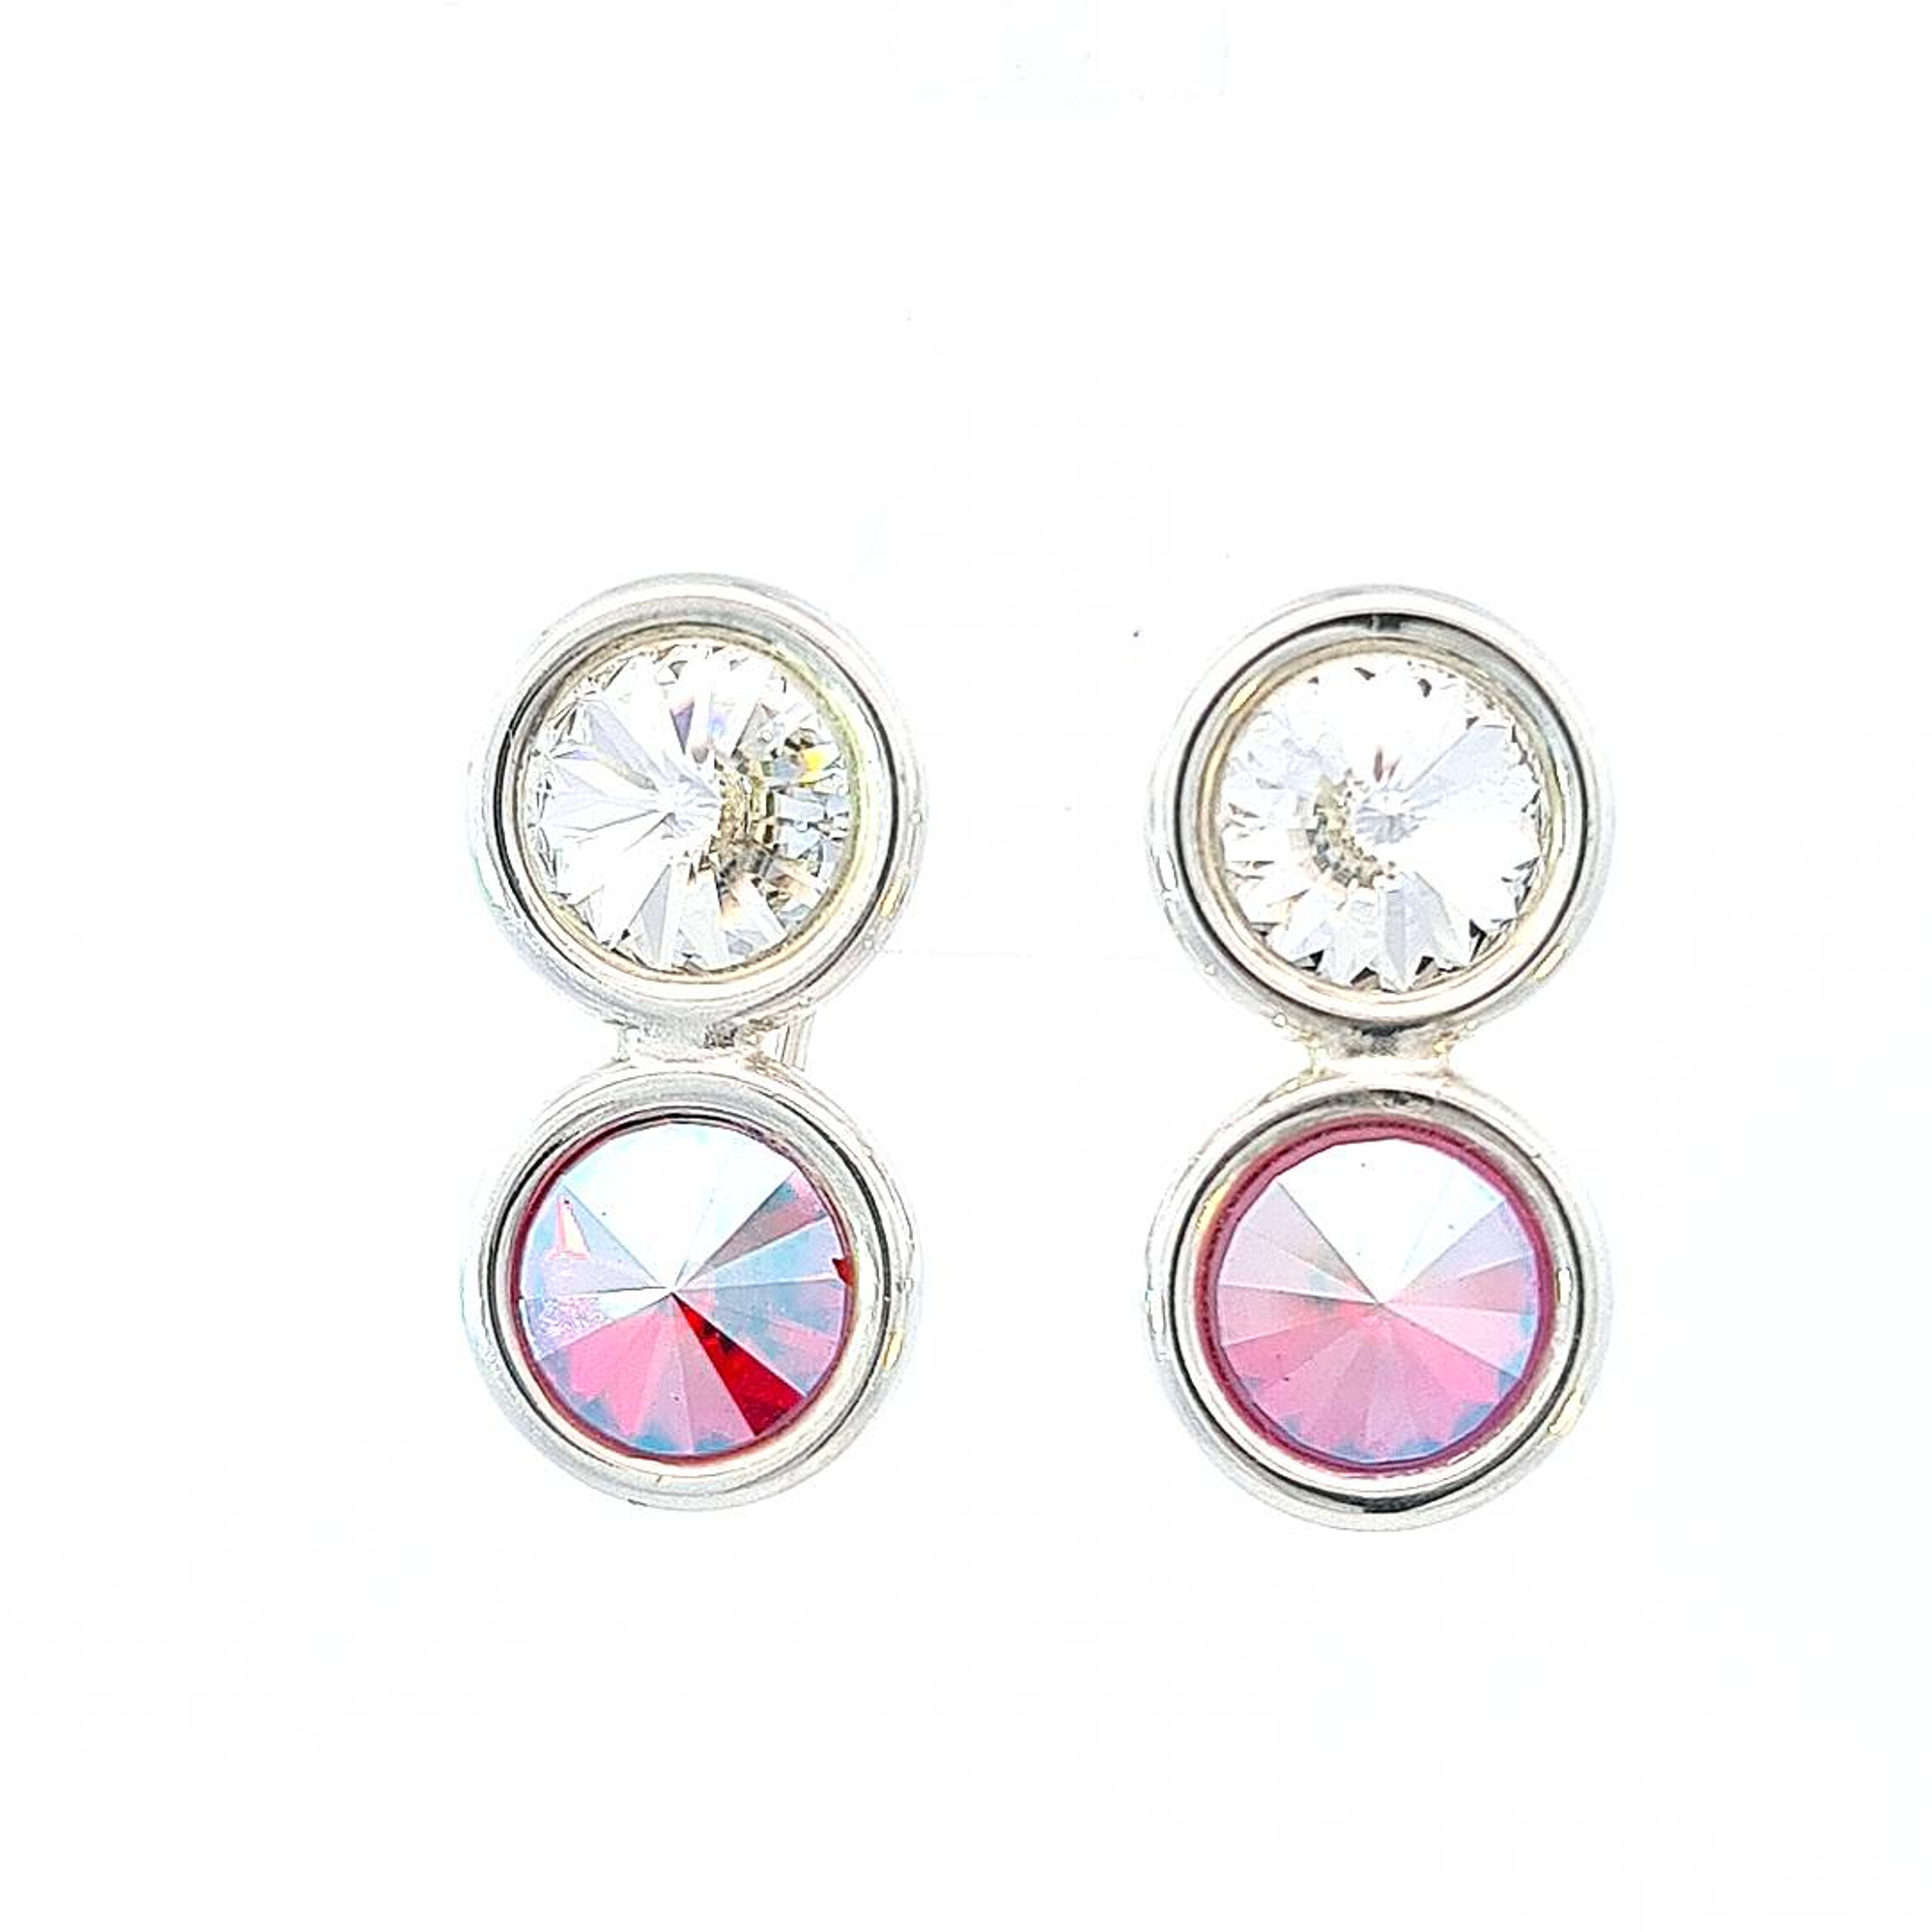 Nickel-free sterling silver clip-on earrings by Magpie Gems, showcasing a front view of rivoli crystals reflecting a spectrum of colours.